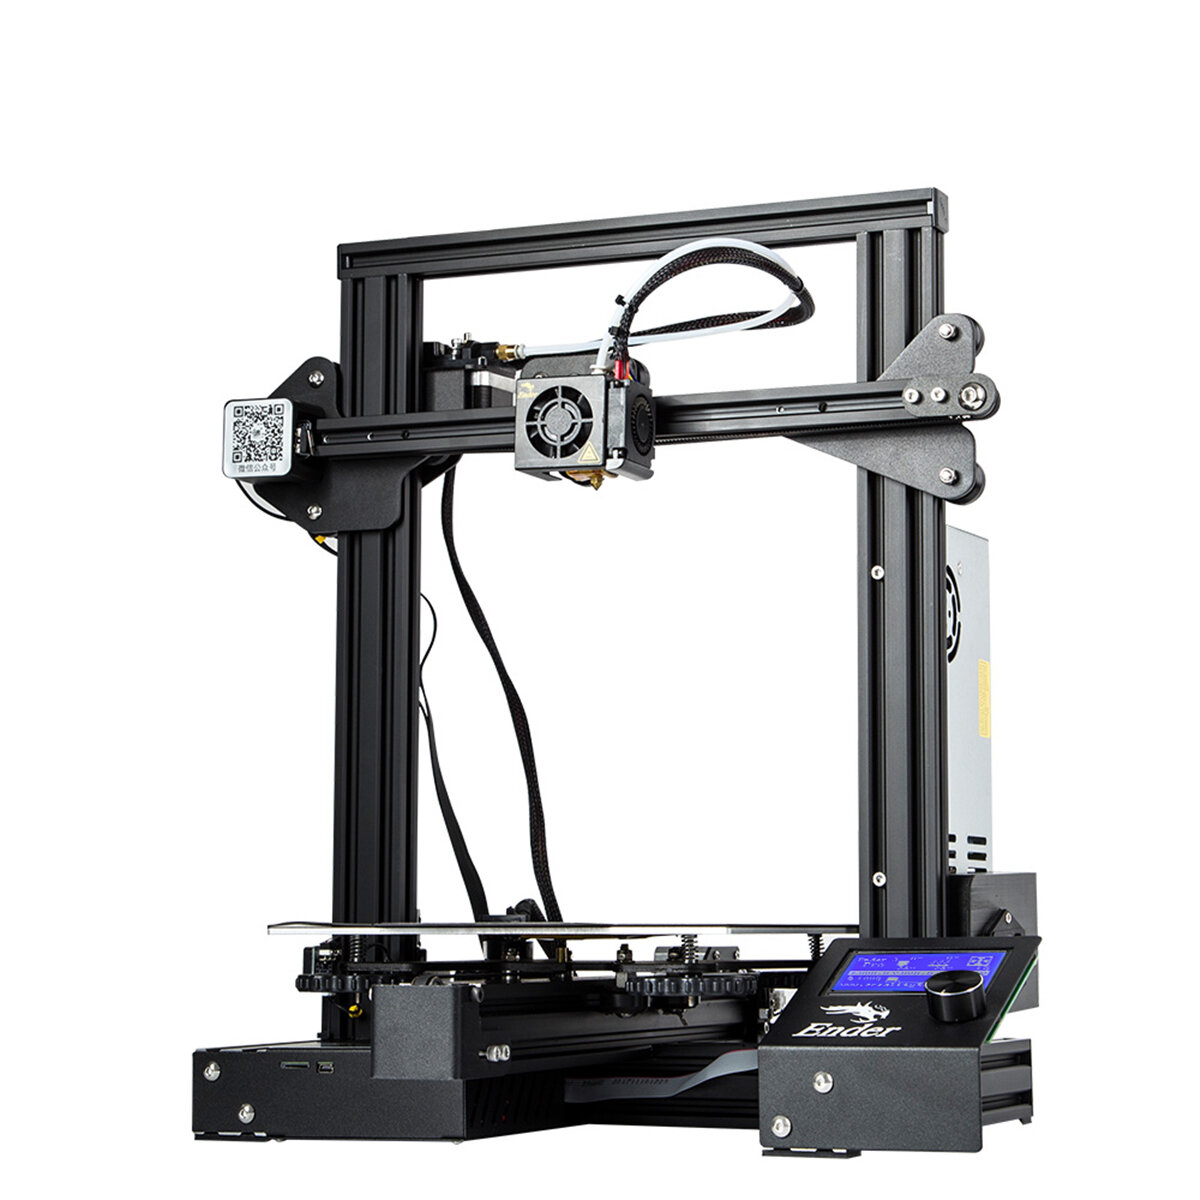 Creality 3D® Ender-3 Pro DIY 3D Printer Kit 220x220x250mm Printing Size With Magnetic Removable Platform Sticker/Power Resume Function/Off-line Printer/Simple Leveling COD